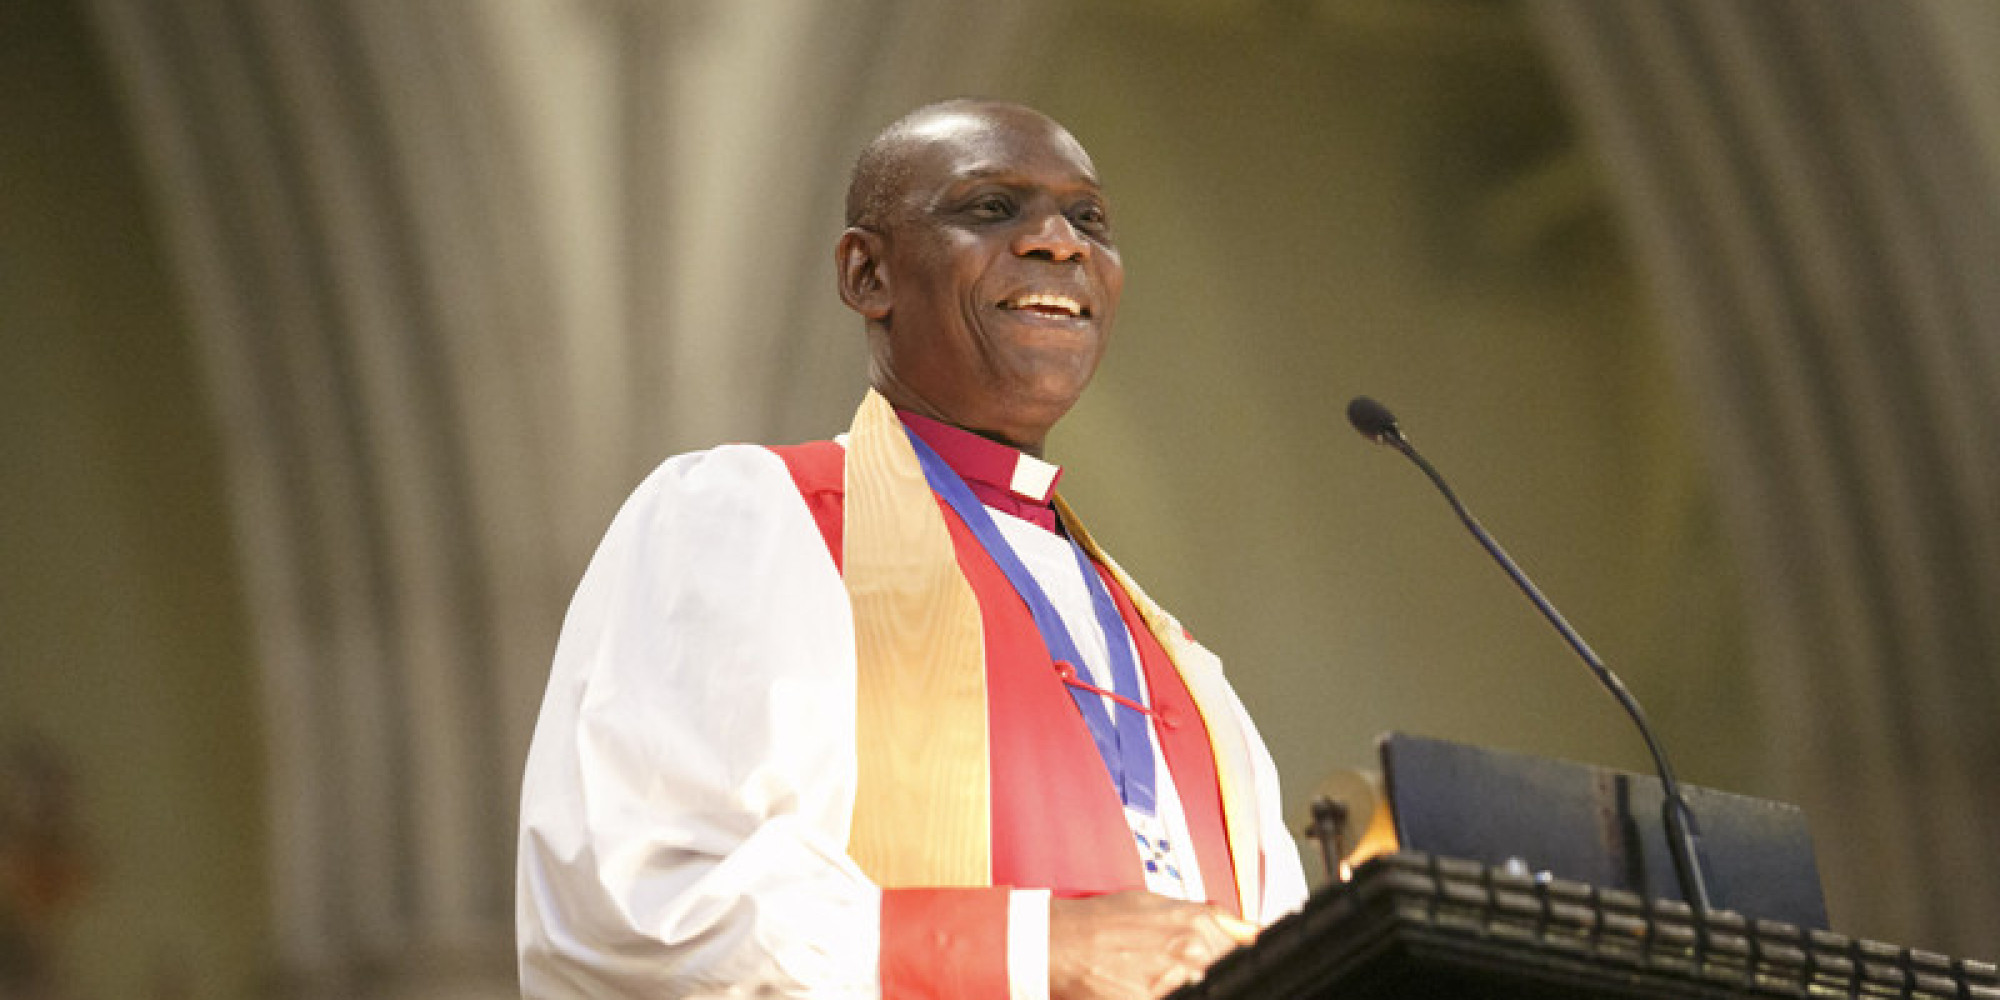 Fisking Bishop Fearon: The Lambeth Establishment Takes on the Global South